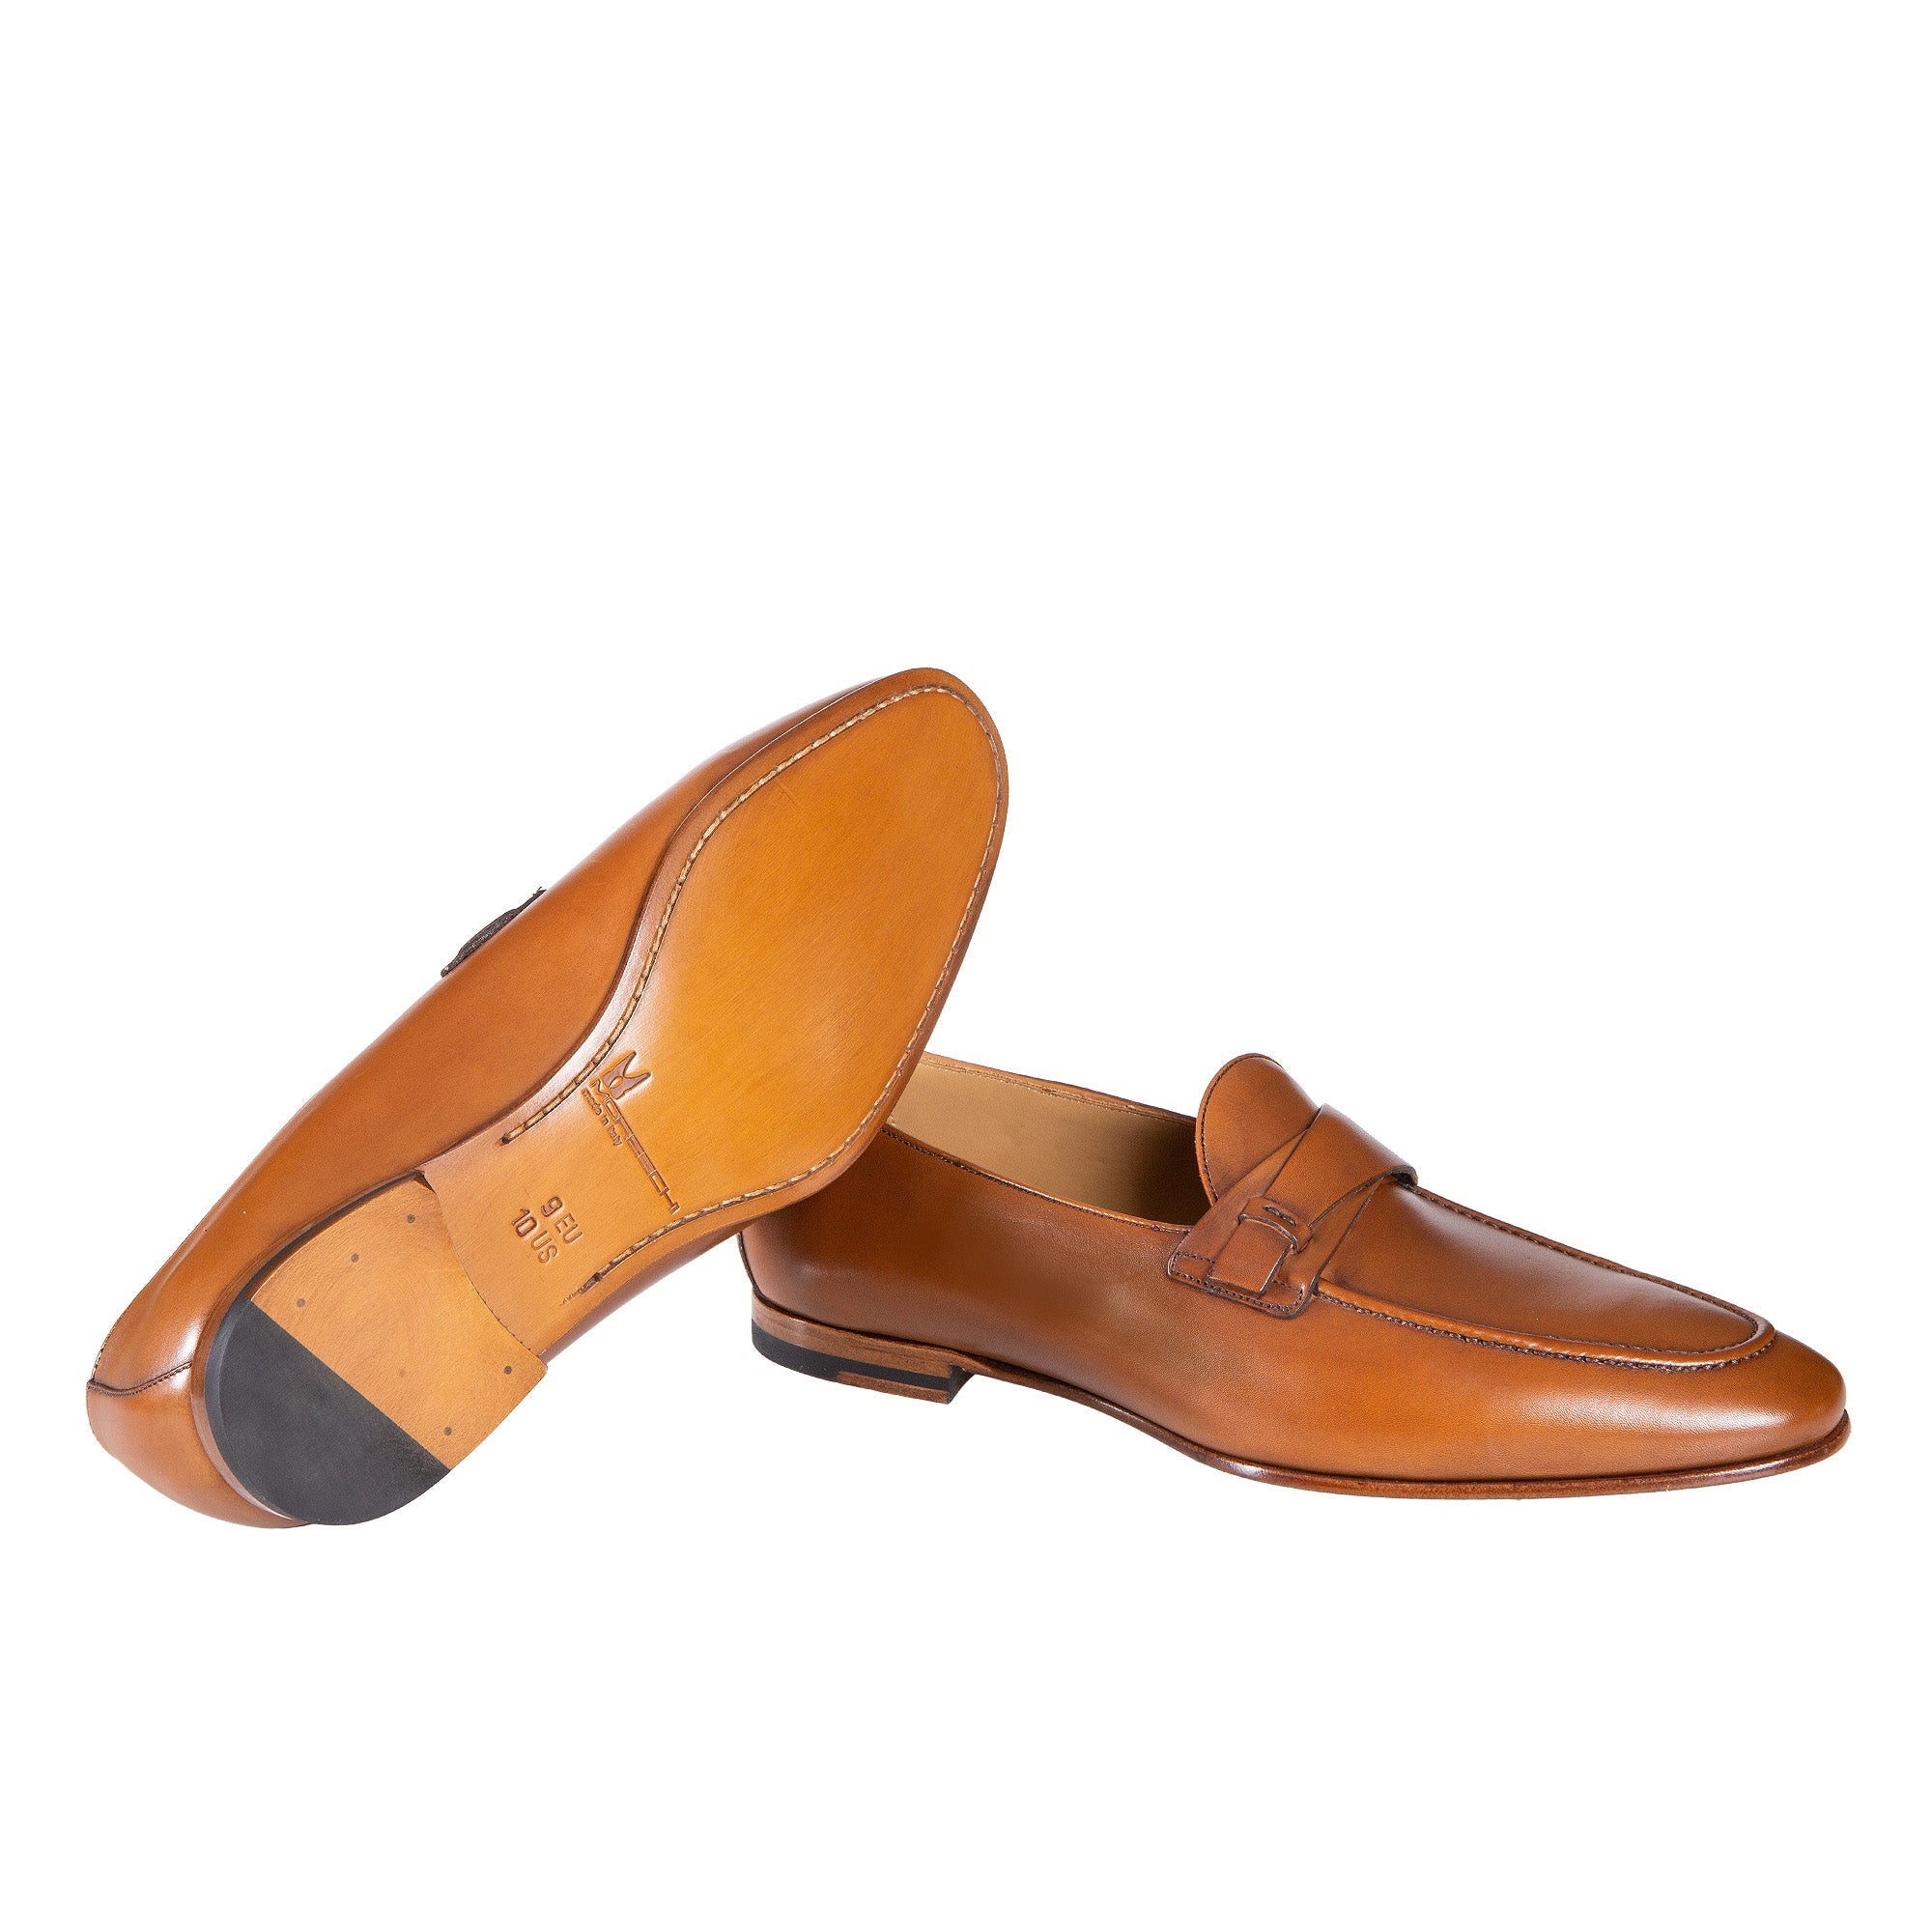 MORESCHI LOAFER LEATHER SHOES BRANDY - Henry BucksLoafers & Driving Shoes80MOR2360 - BRNDY - 6 1/2